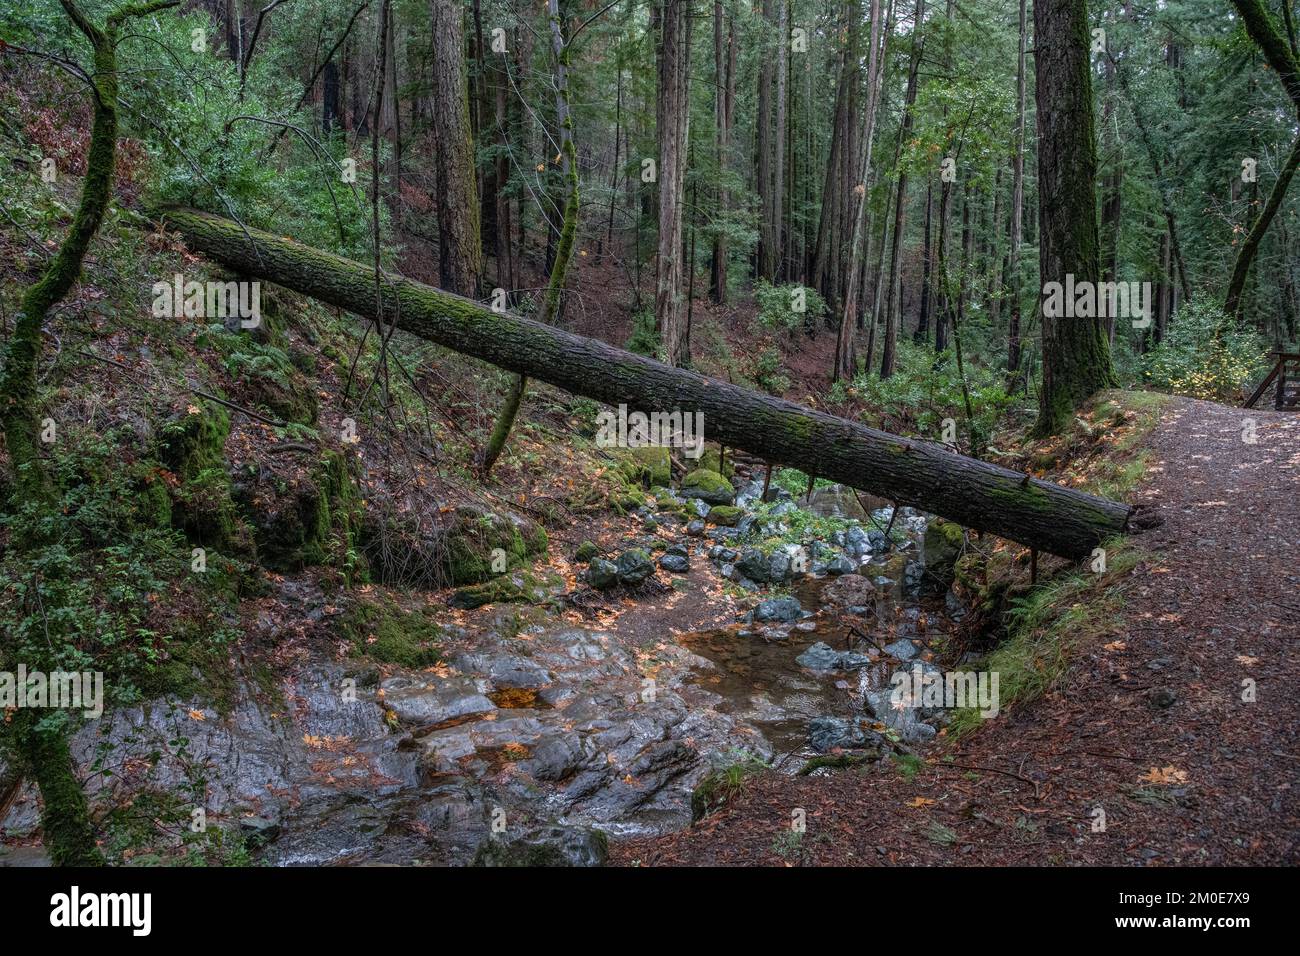 A lush riparian zone along a forested stream in Sonoma county, California on a wet winter day. Stock Photo